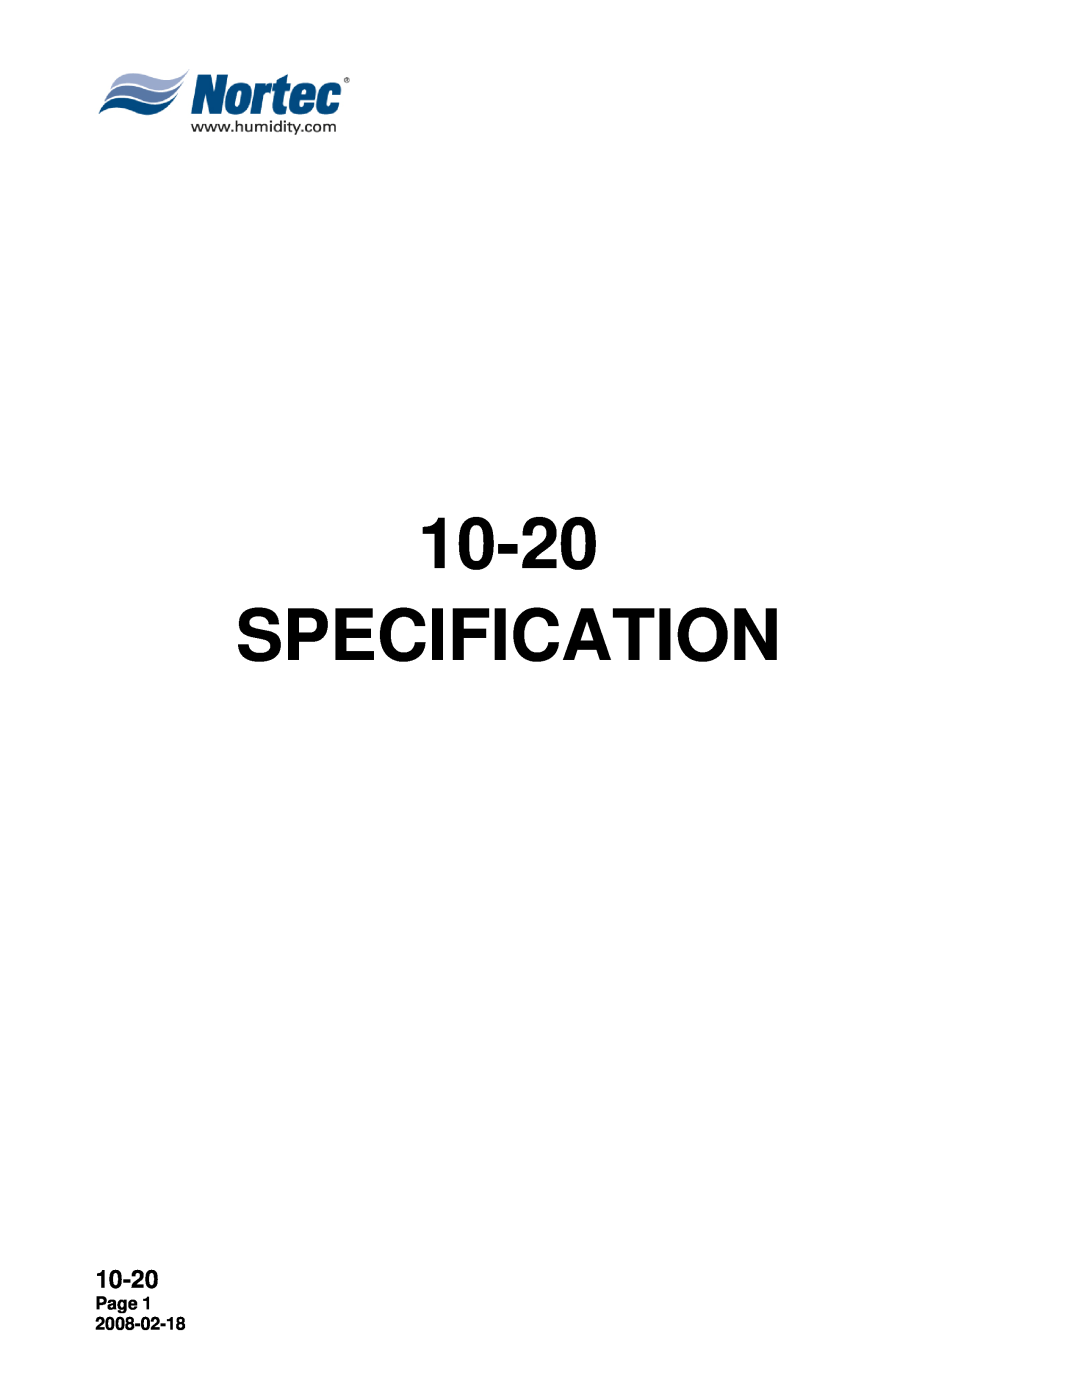 Nortec Industries NHRS Series manual Specification, 10-20, Page 